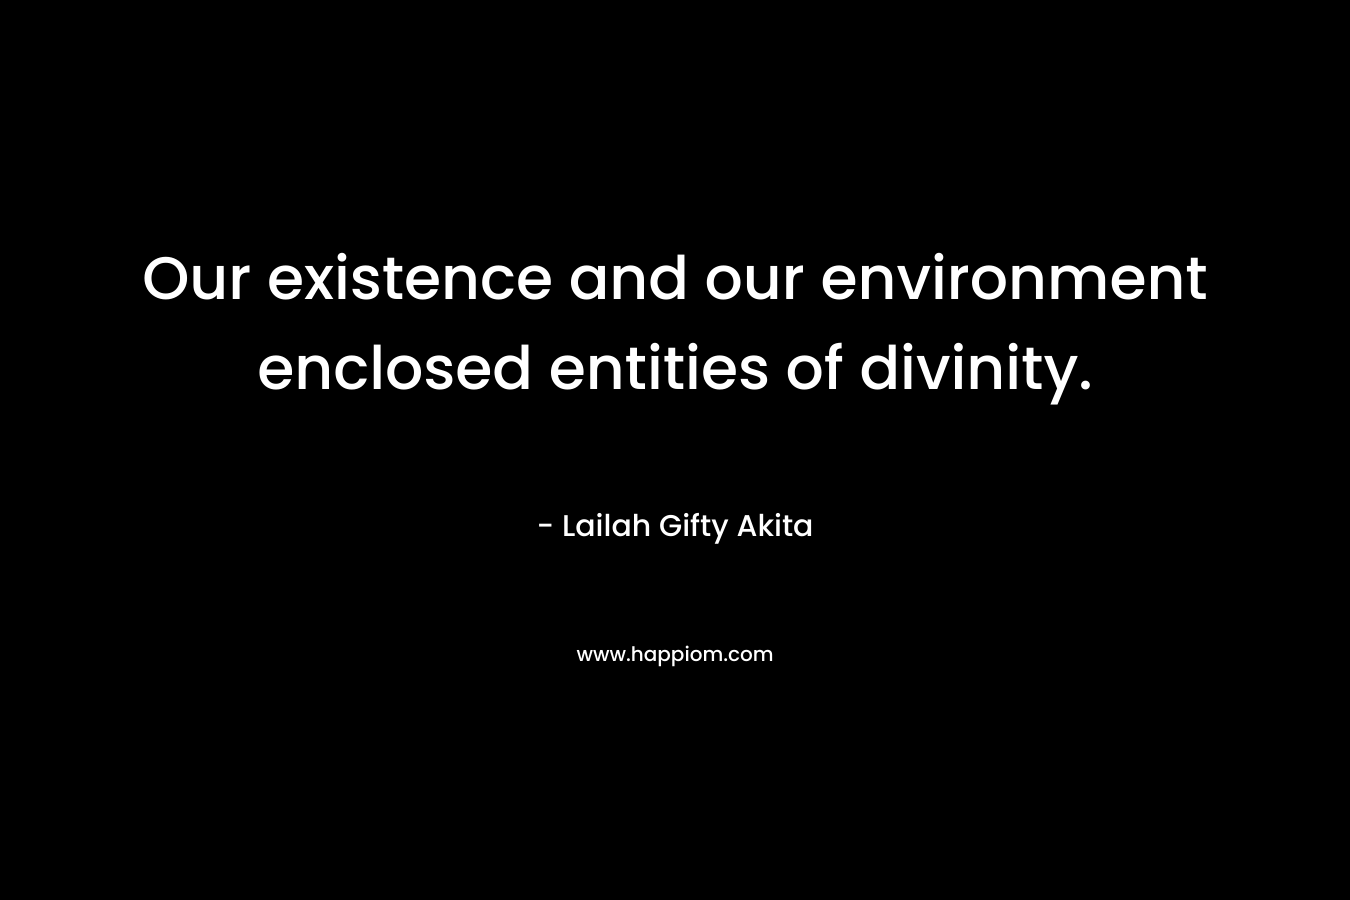 Our existence and our environment enclosed entities of divinity.